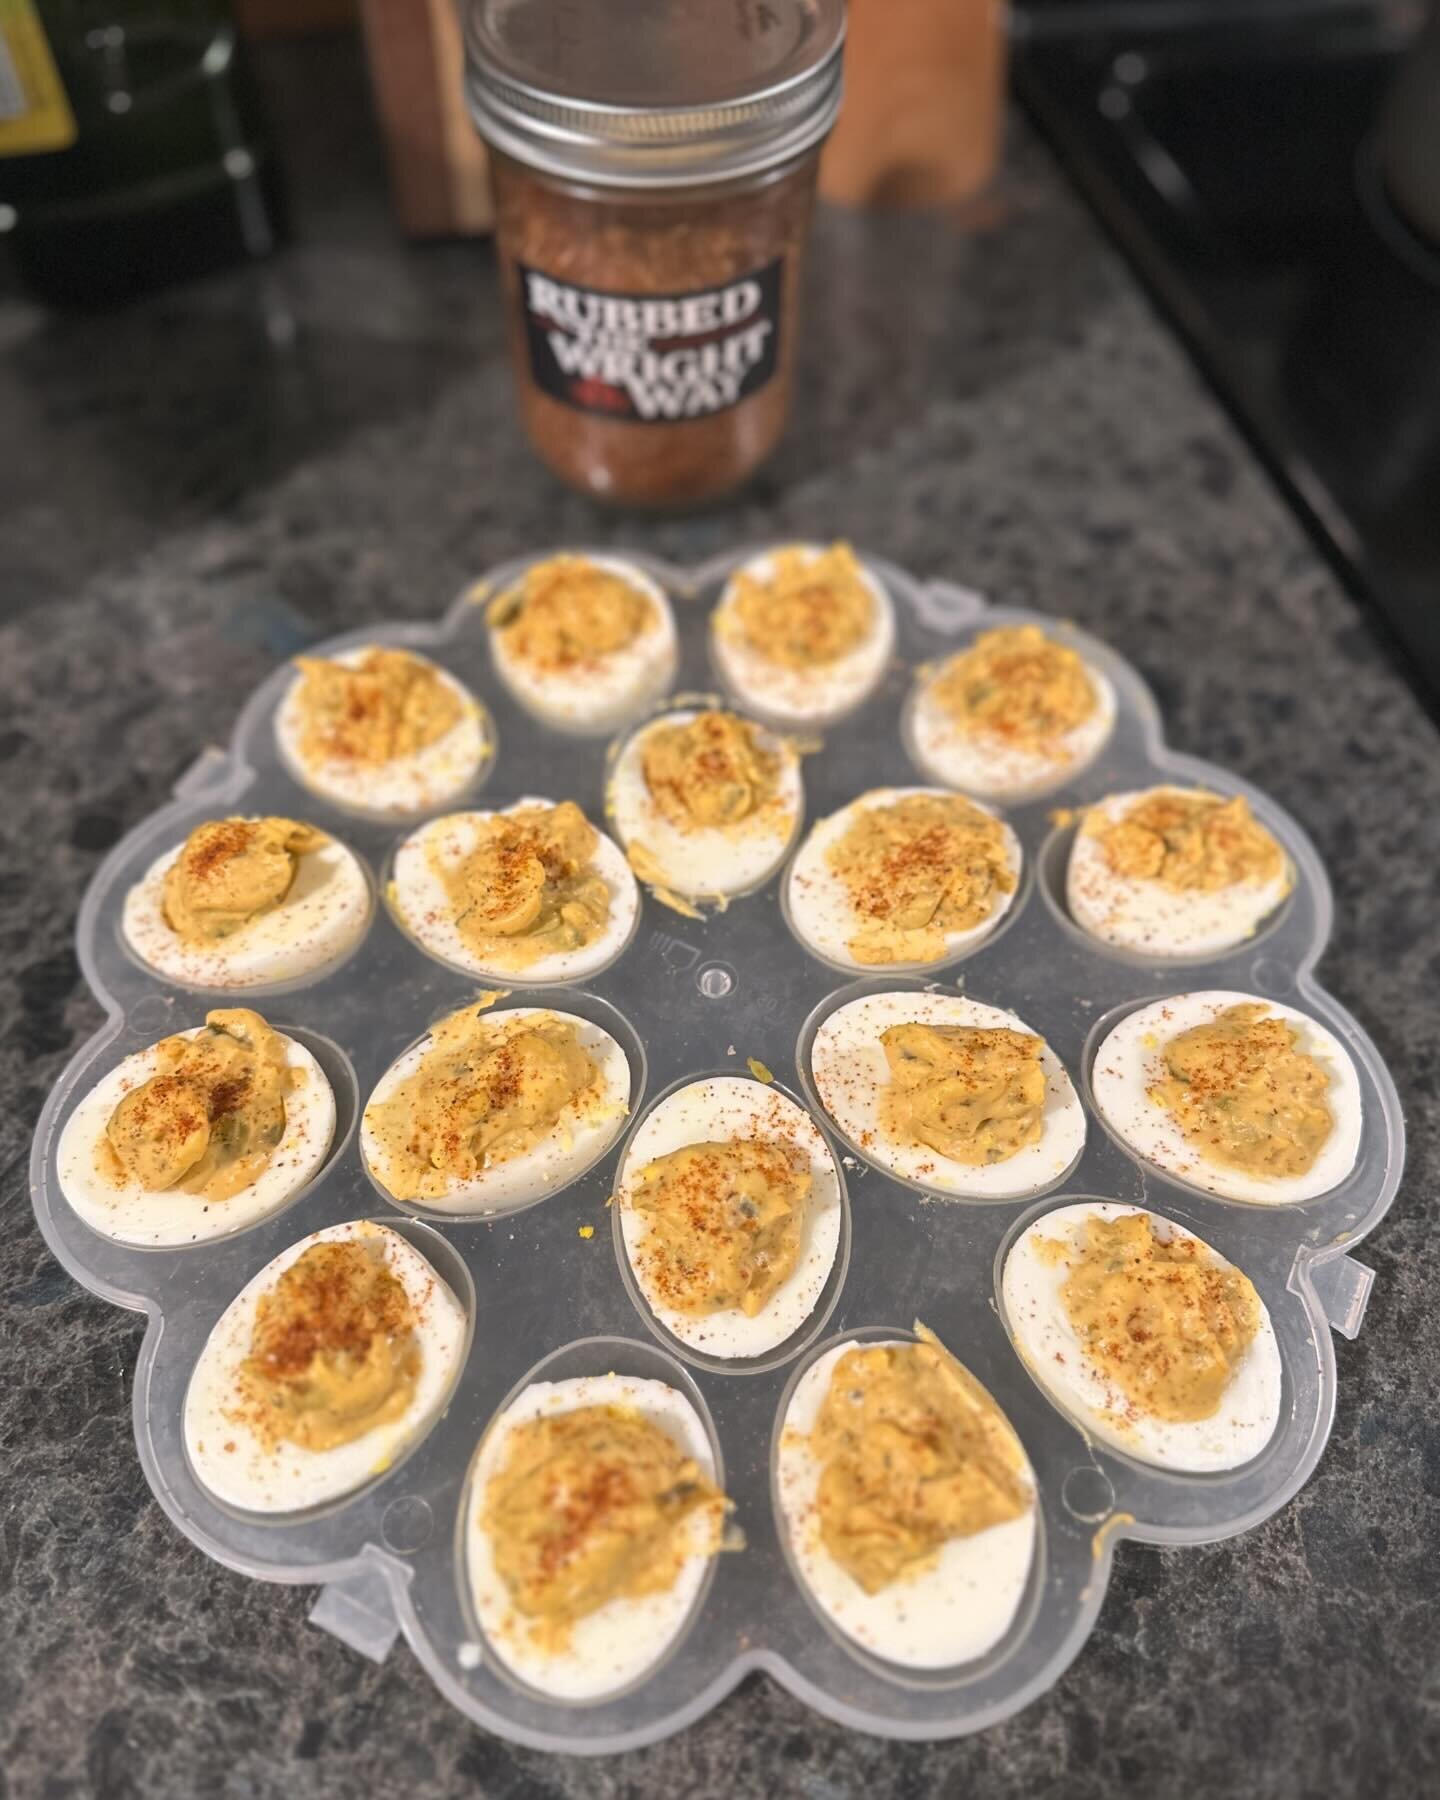 Probably won&rsquo;t win any awards for my plating but Rubbed the Wright away deviled eggs are the real deal. Merry Christmas to all and I hope you&rsquo;re eating well today.